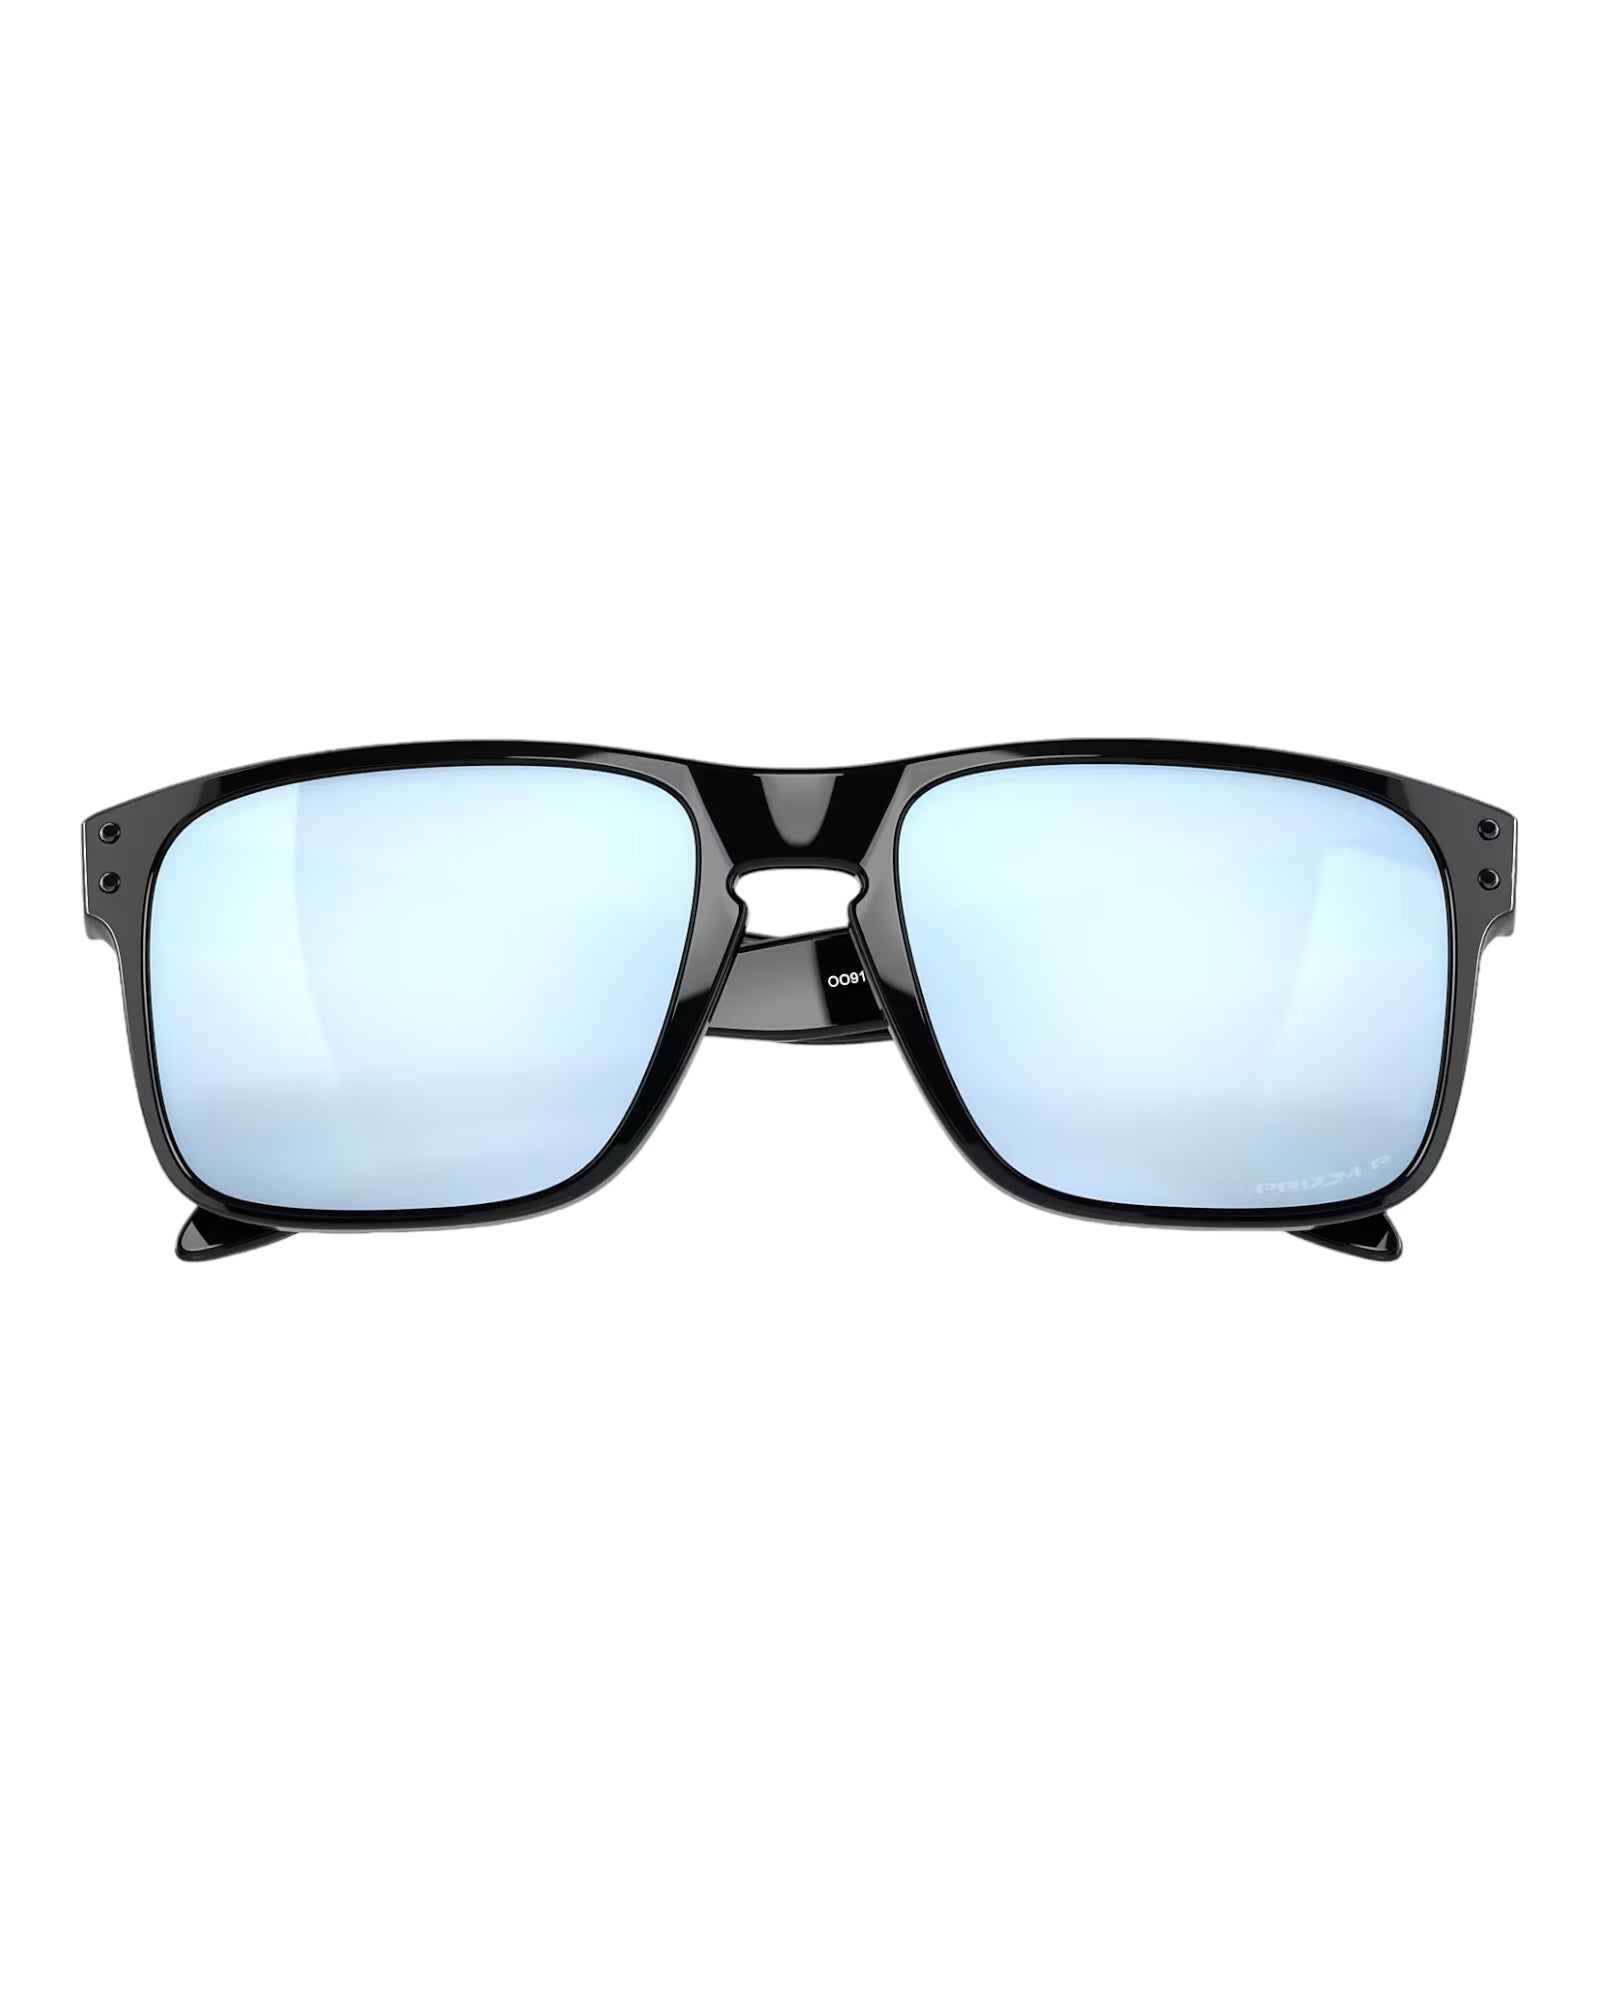 Holbrook is a timeless, classic design fused with modern Oakley technology. 